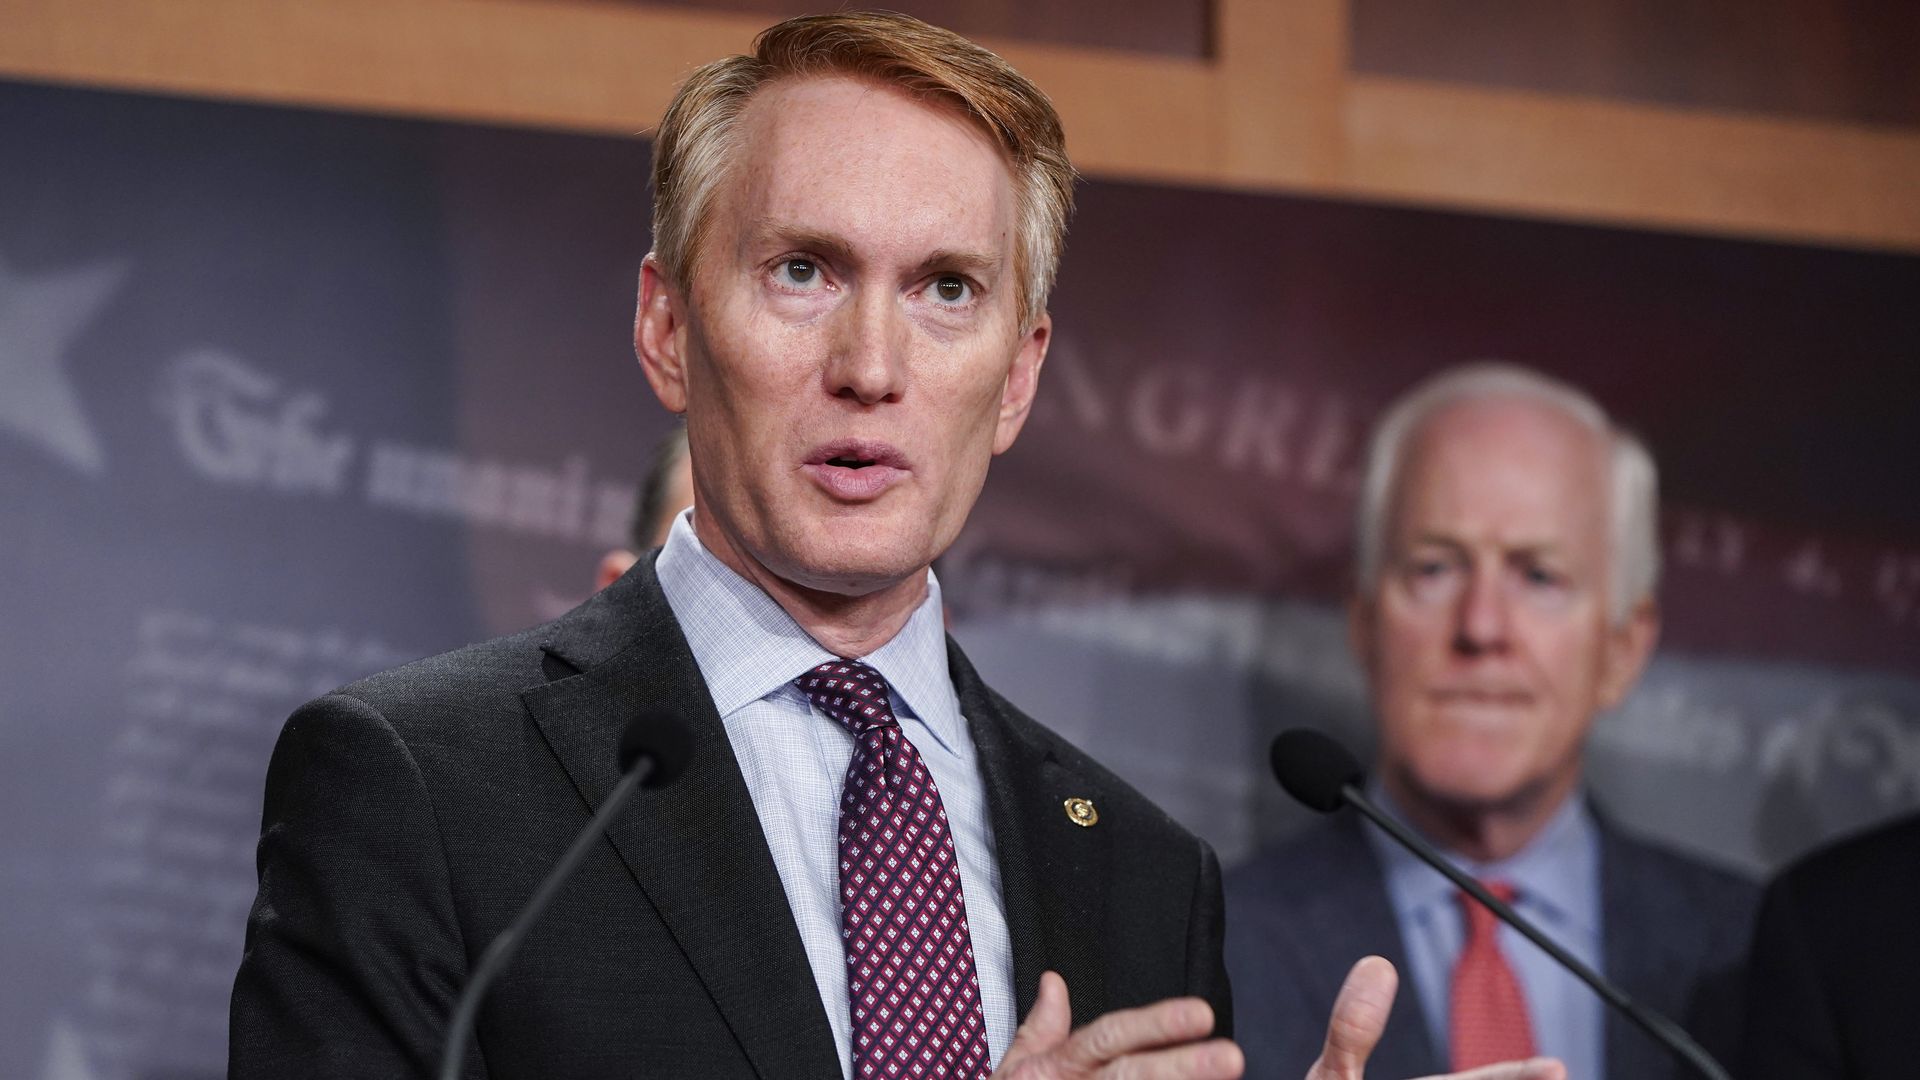 Senator James Lankford (R-OK) speaks about his opposition to the "For The People Act" on June 17, 2021.